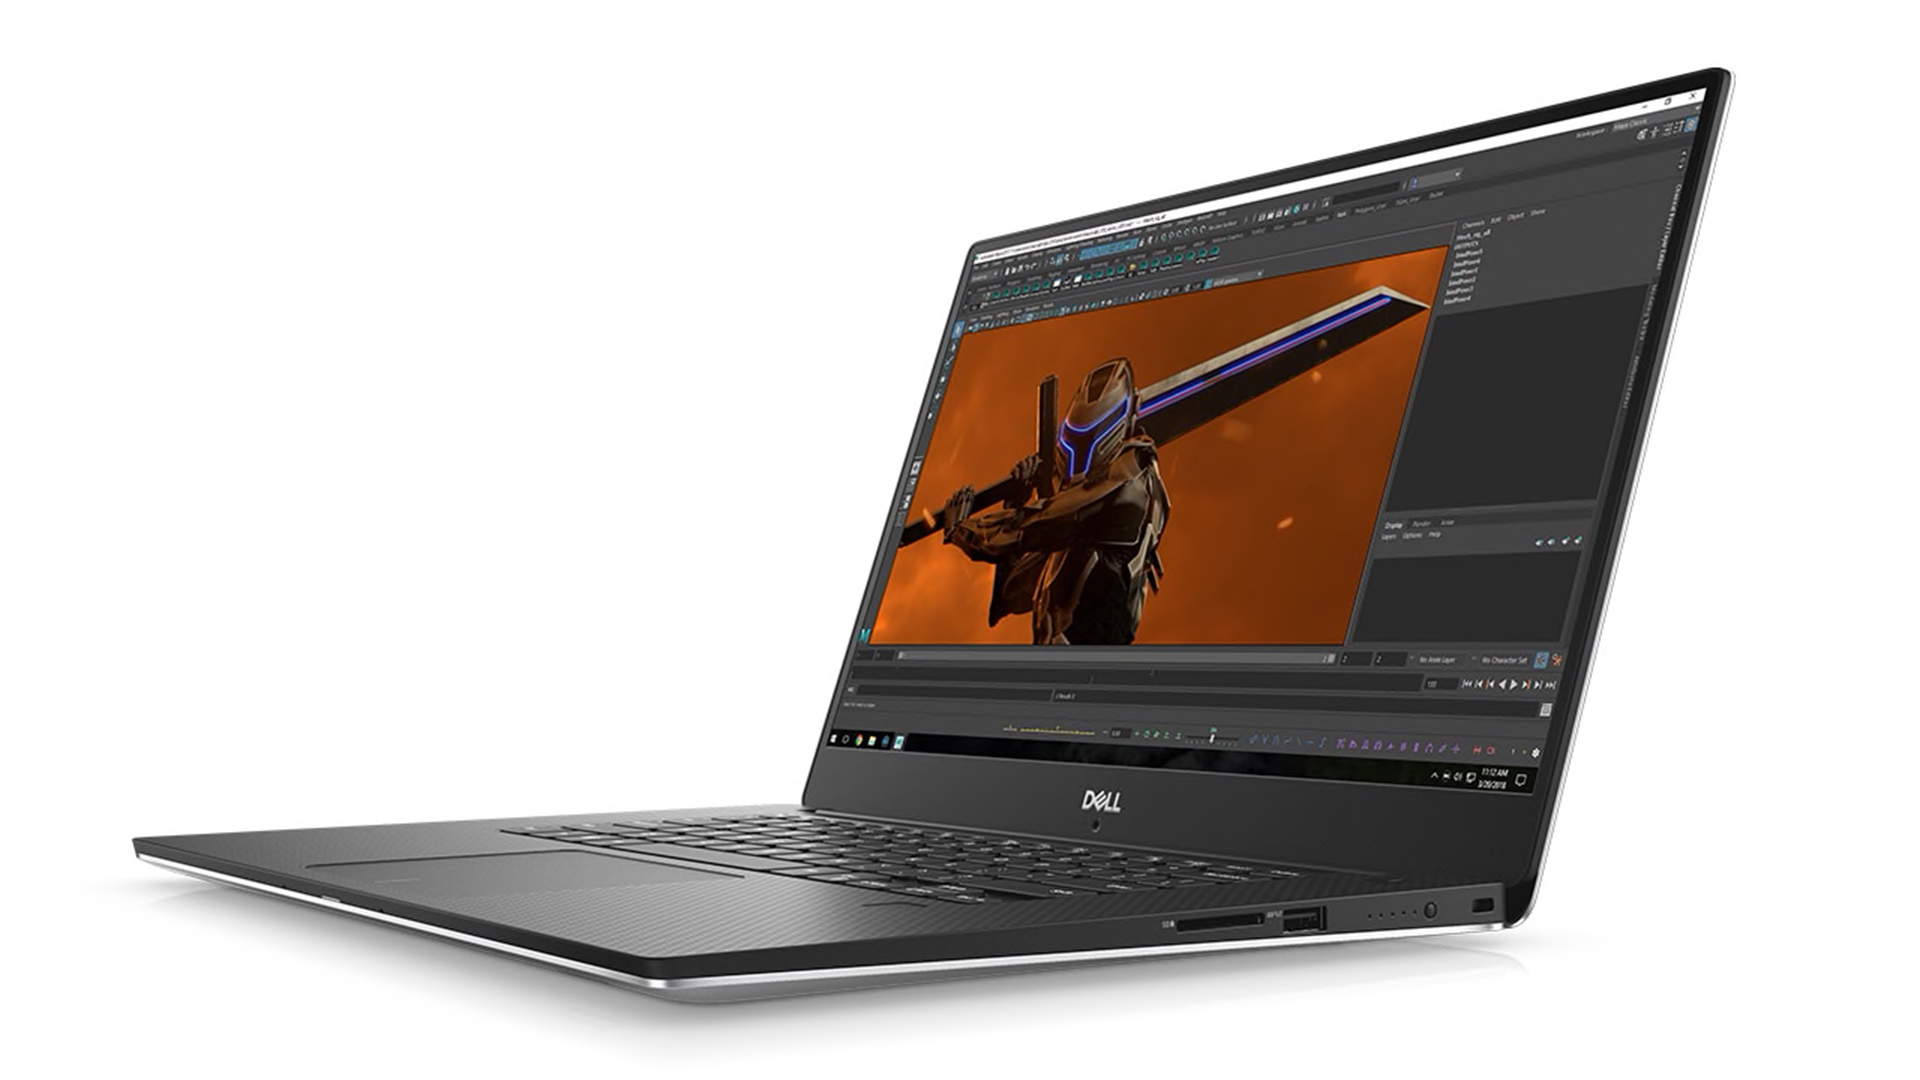 Dell's Precision 5530 is a powerful machine. But do you buy it now?